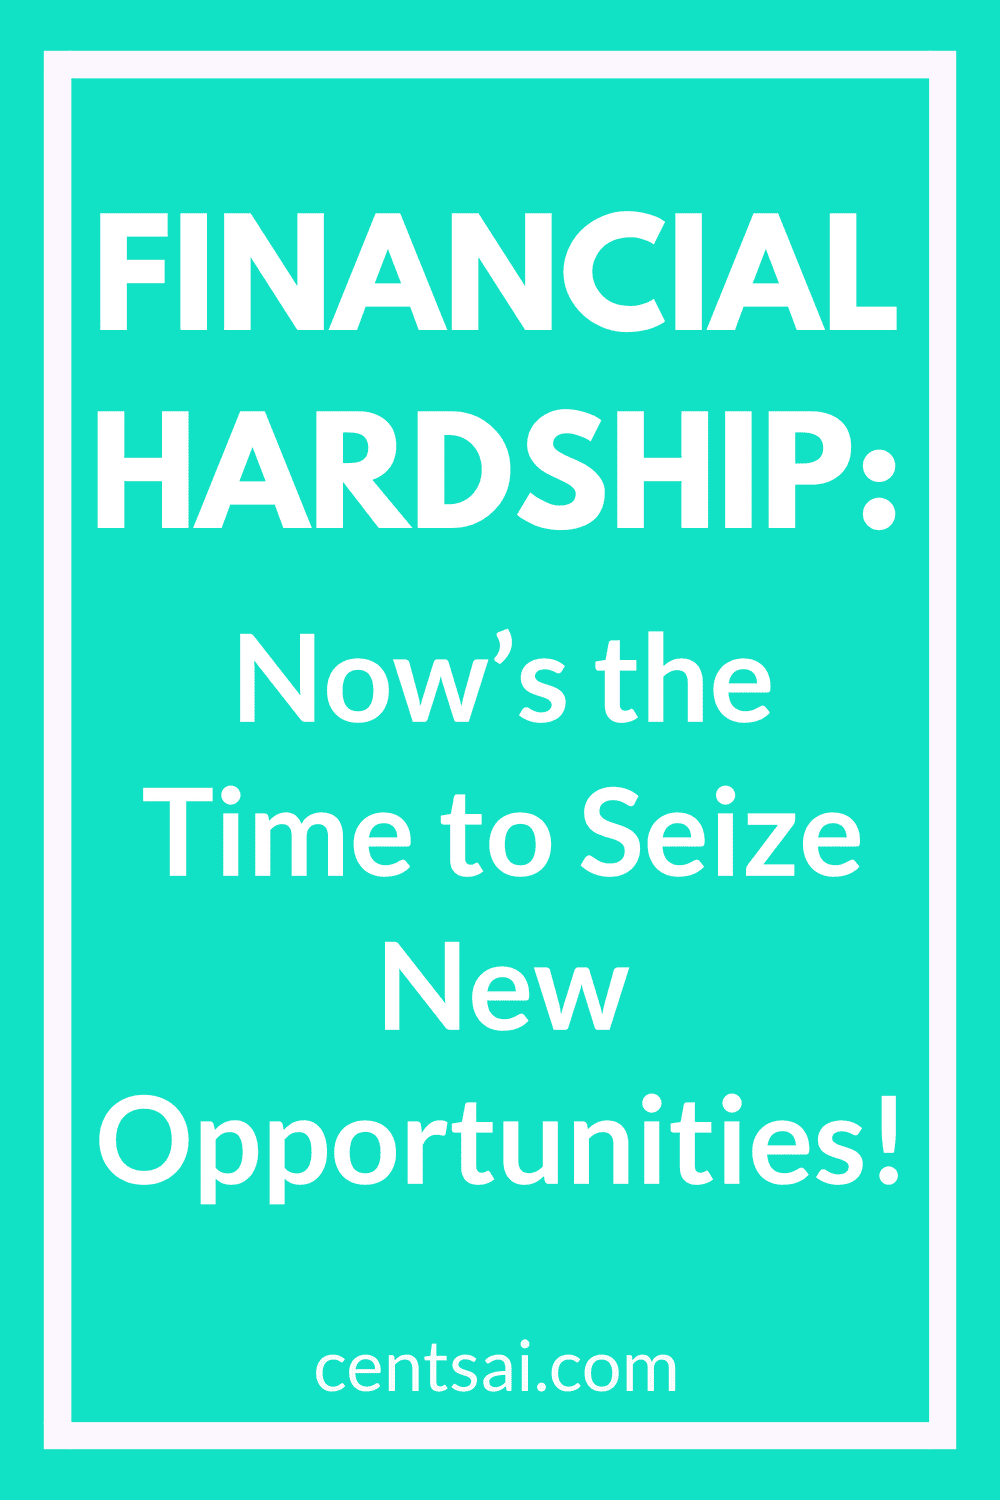 Financial Hardship: Now’s the Time to Seize New Opportunities! Dealing with financial hardship is tough, but recovery may not be as far off as you think. Keep a keen eye out for new opportunities! #financialhardship